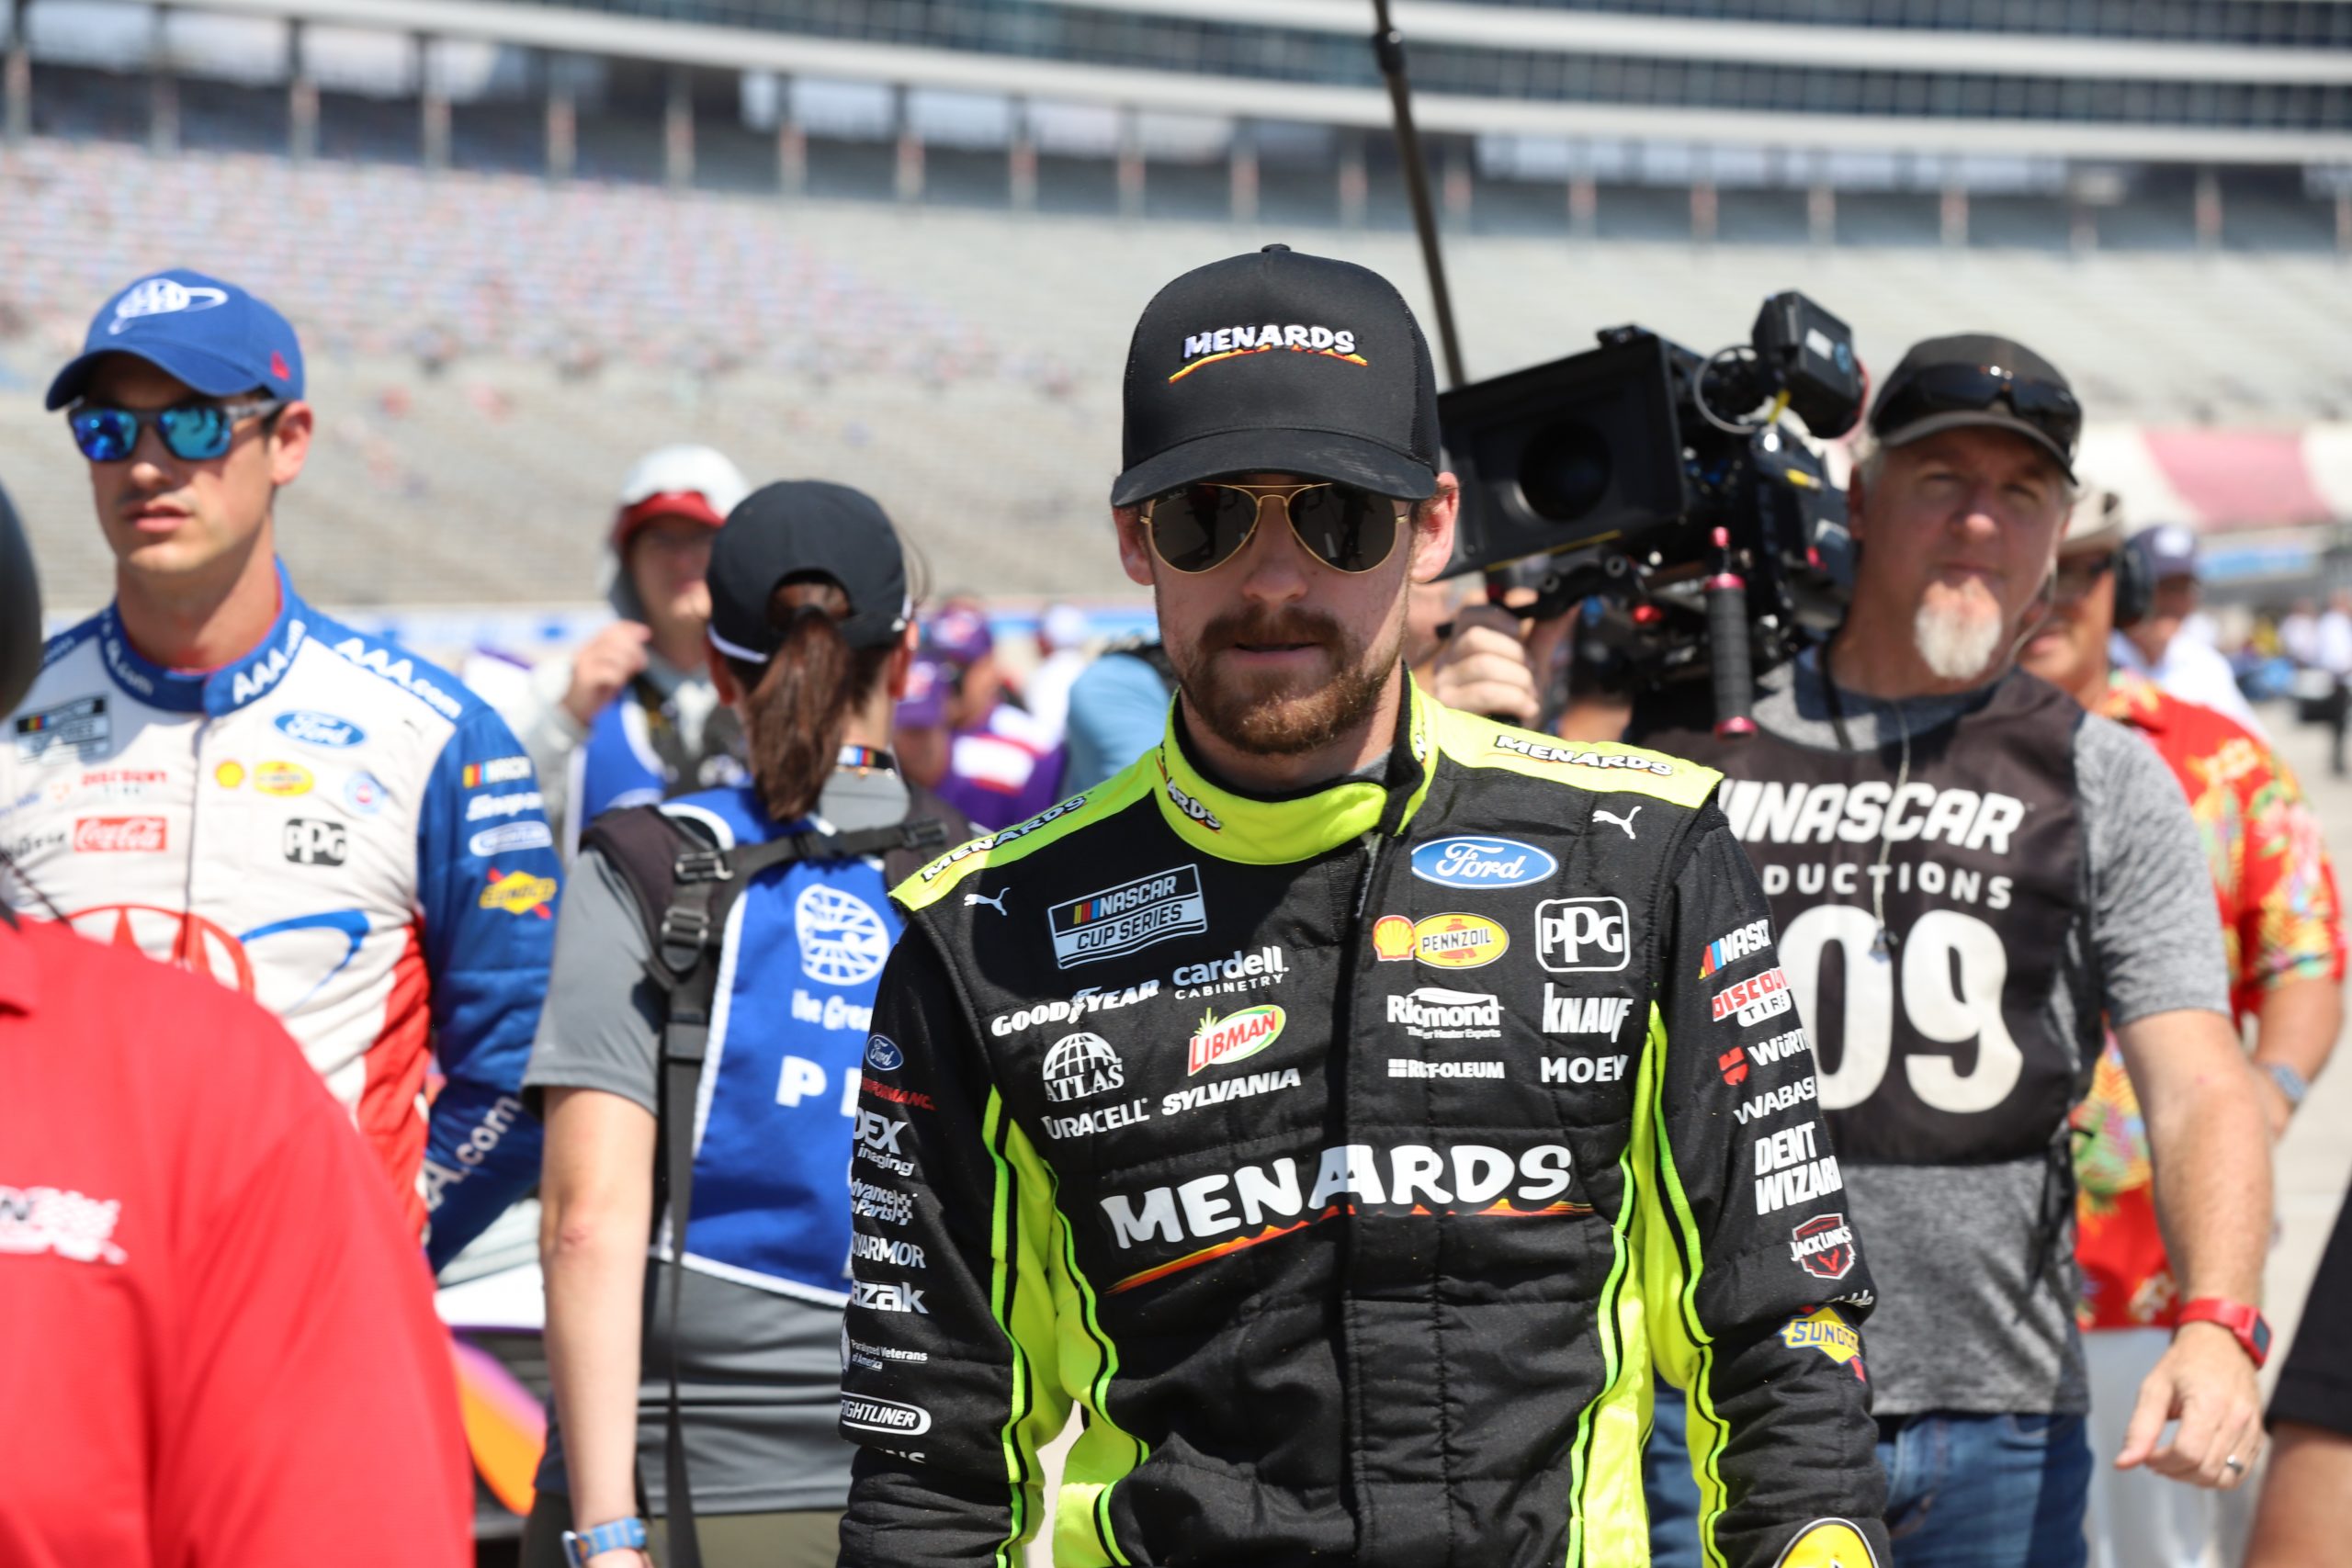 Ryan Blaney may have his head down, but that is because he is focused on a strong ROVAL performance. (Photo: Dylan Nadwodny | The Podium Finish)